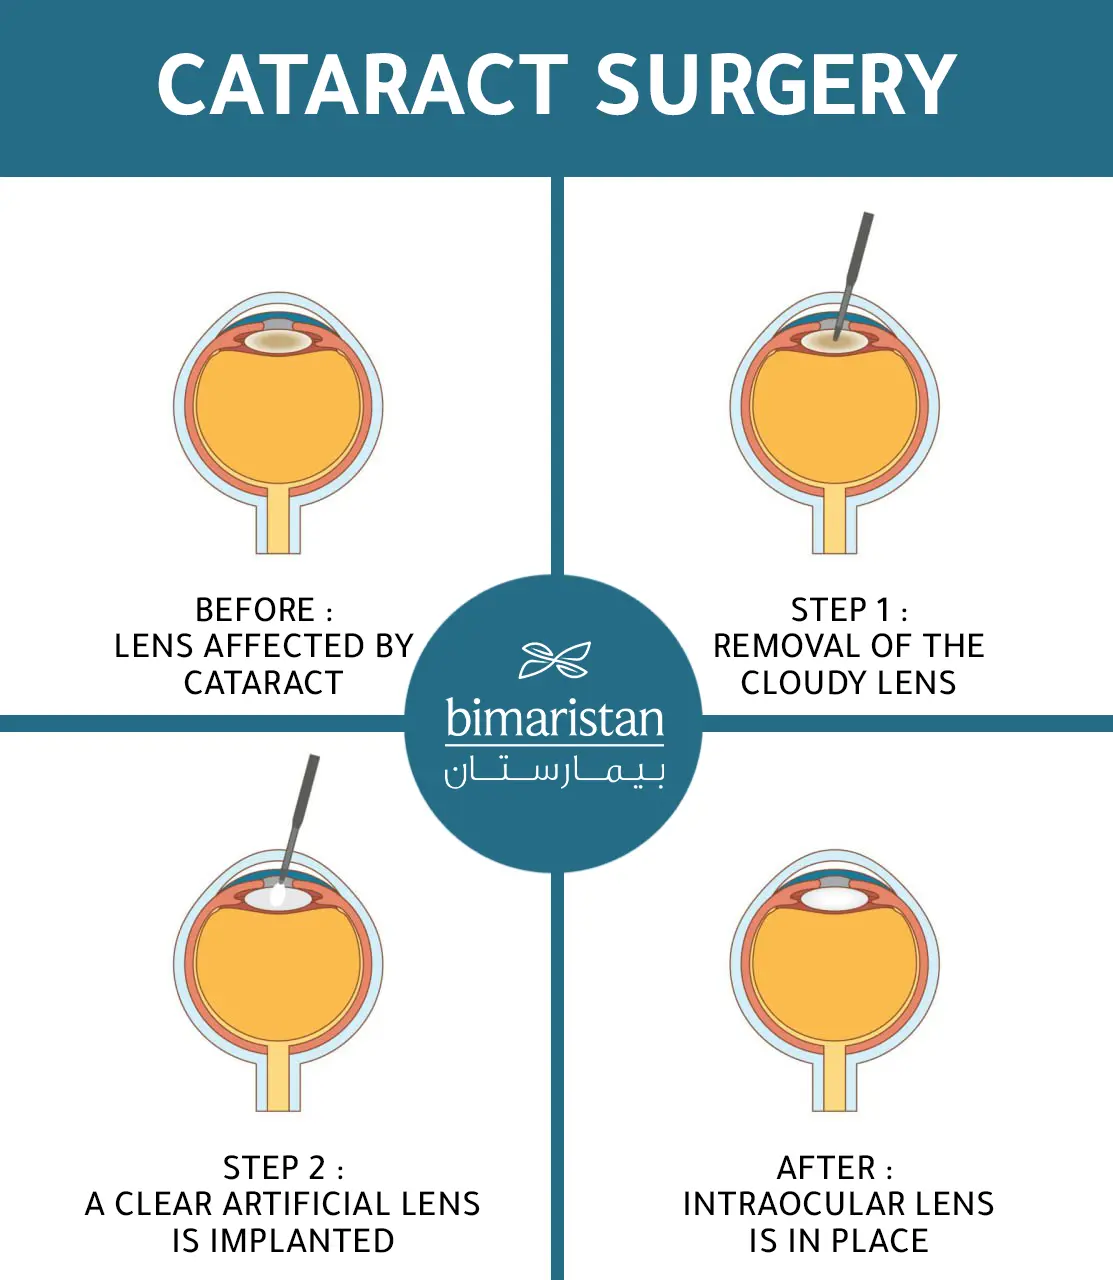 Steps of the Intraocular Lens Implant in Turkey